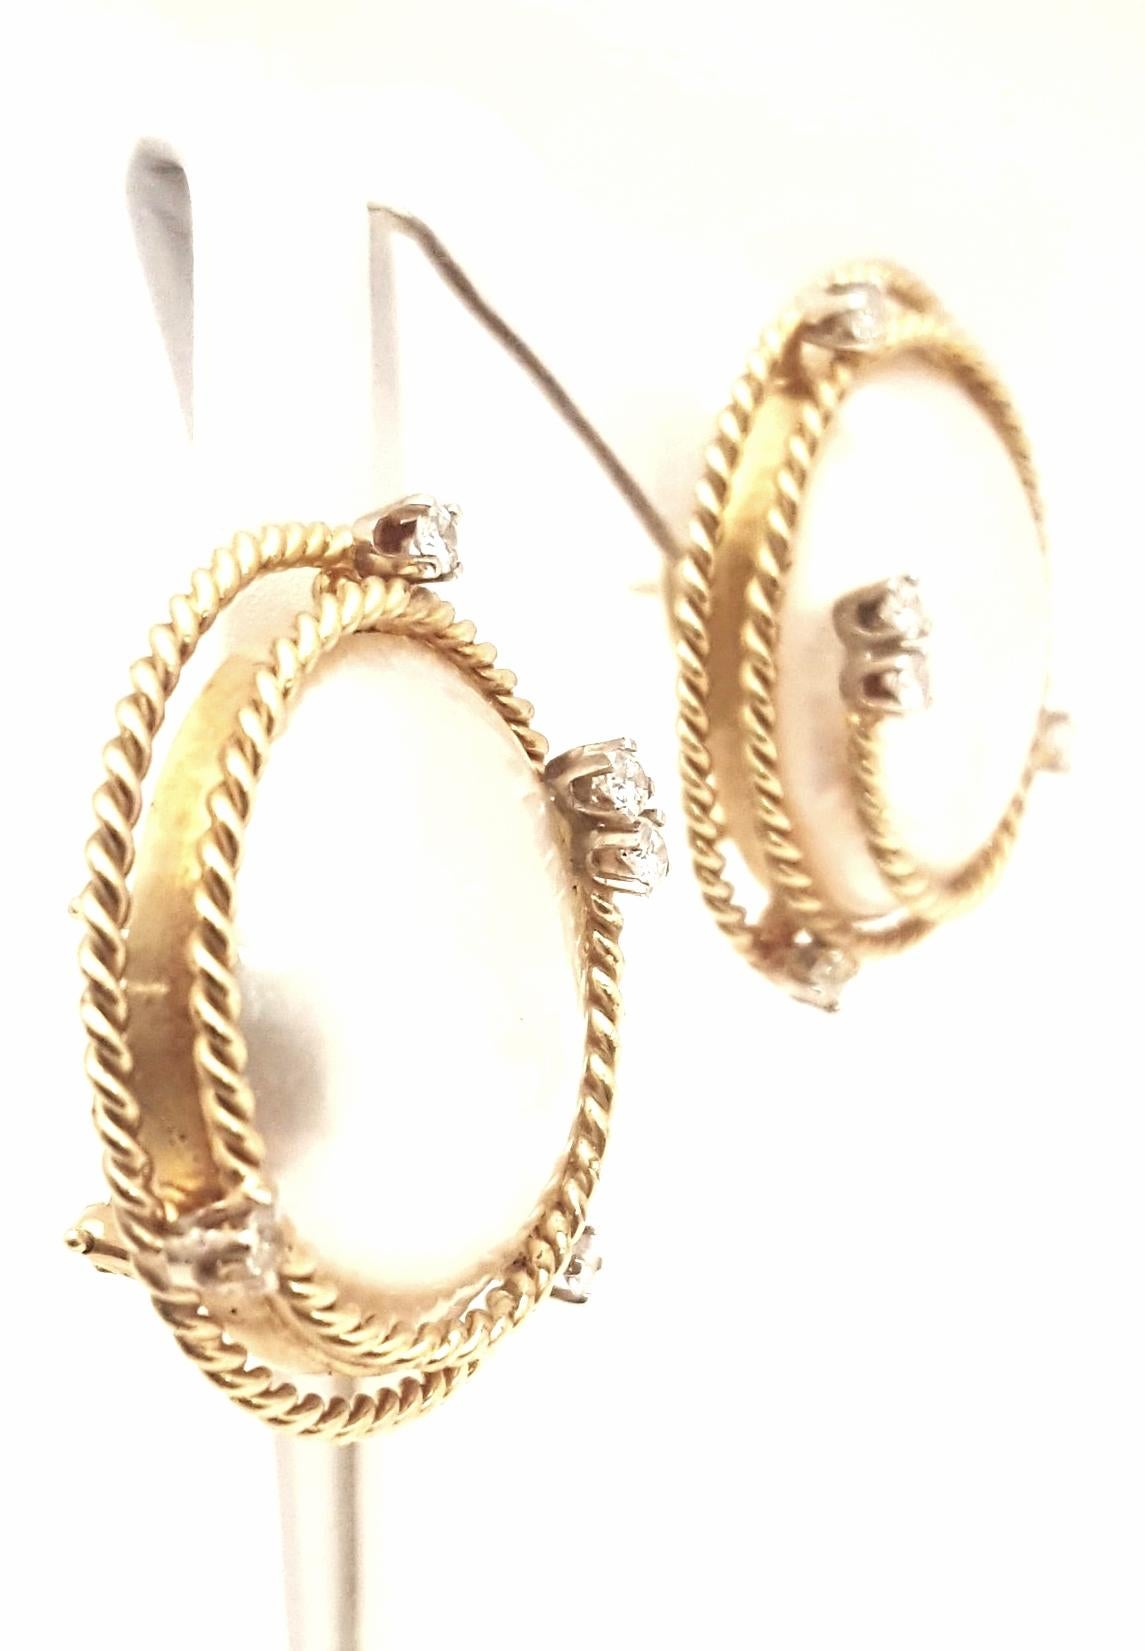 These fabulous Mabe pearl earrings will never be out of style or dated.  Beginning with bezel set round Mabe Pearl measuring an impressive 23mm!  Beautifully accented by 18 karat yellow gold rope borders boasting five brilliant cut diamonds on each